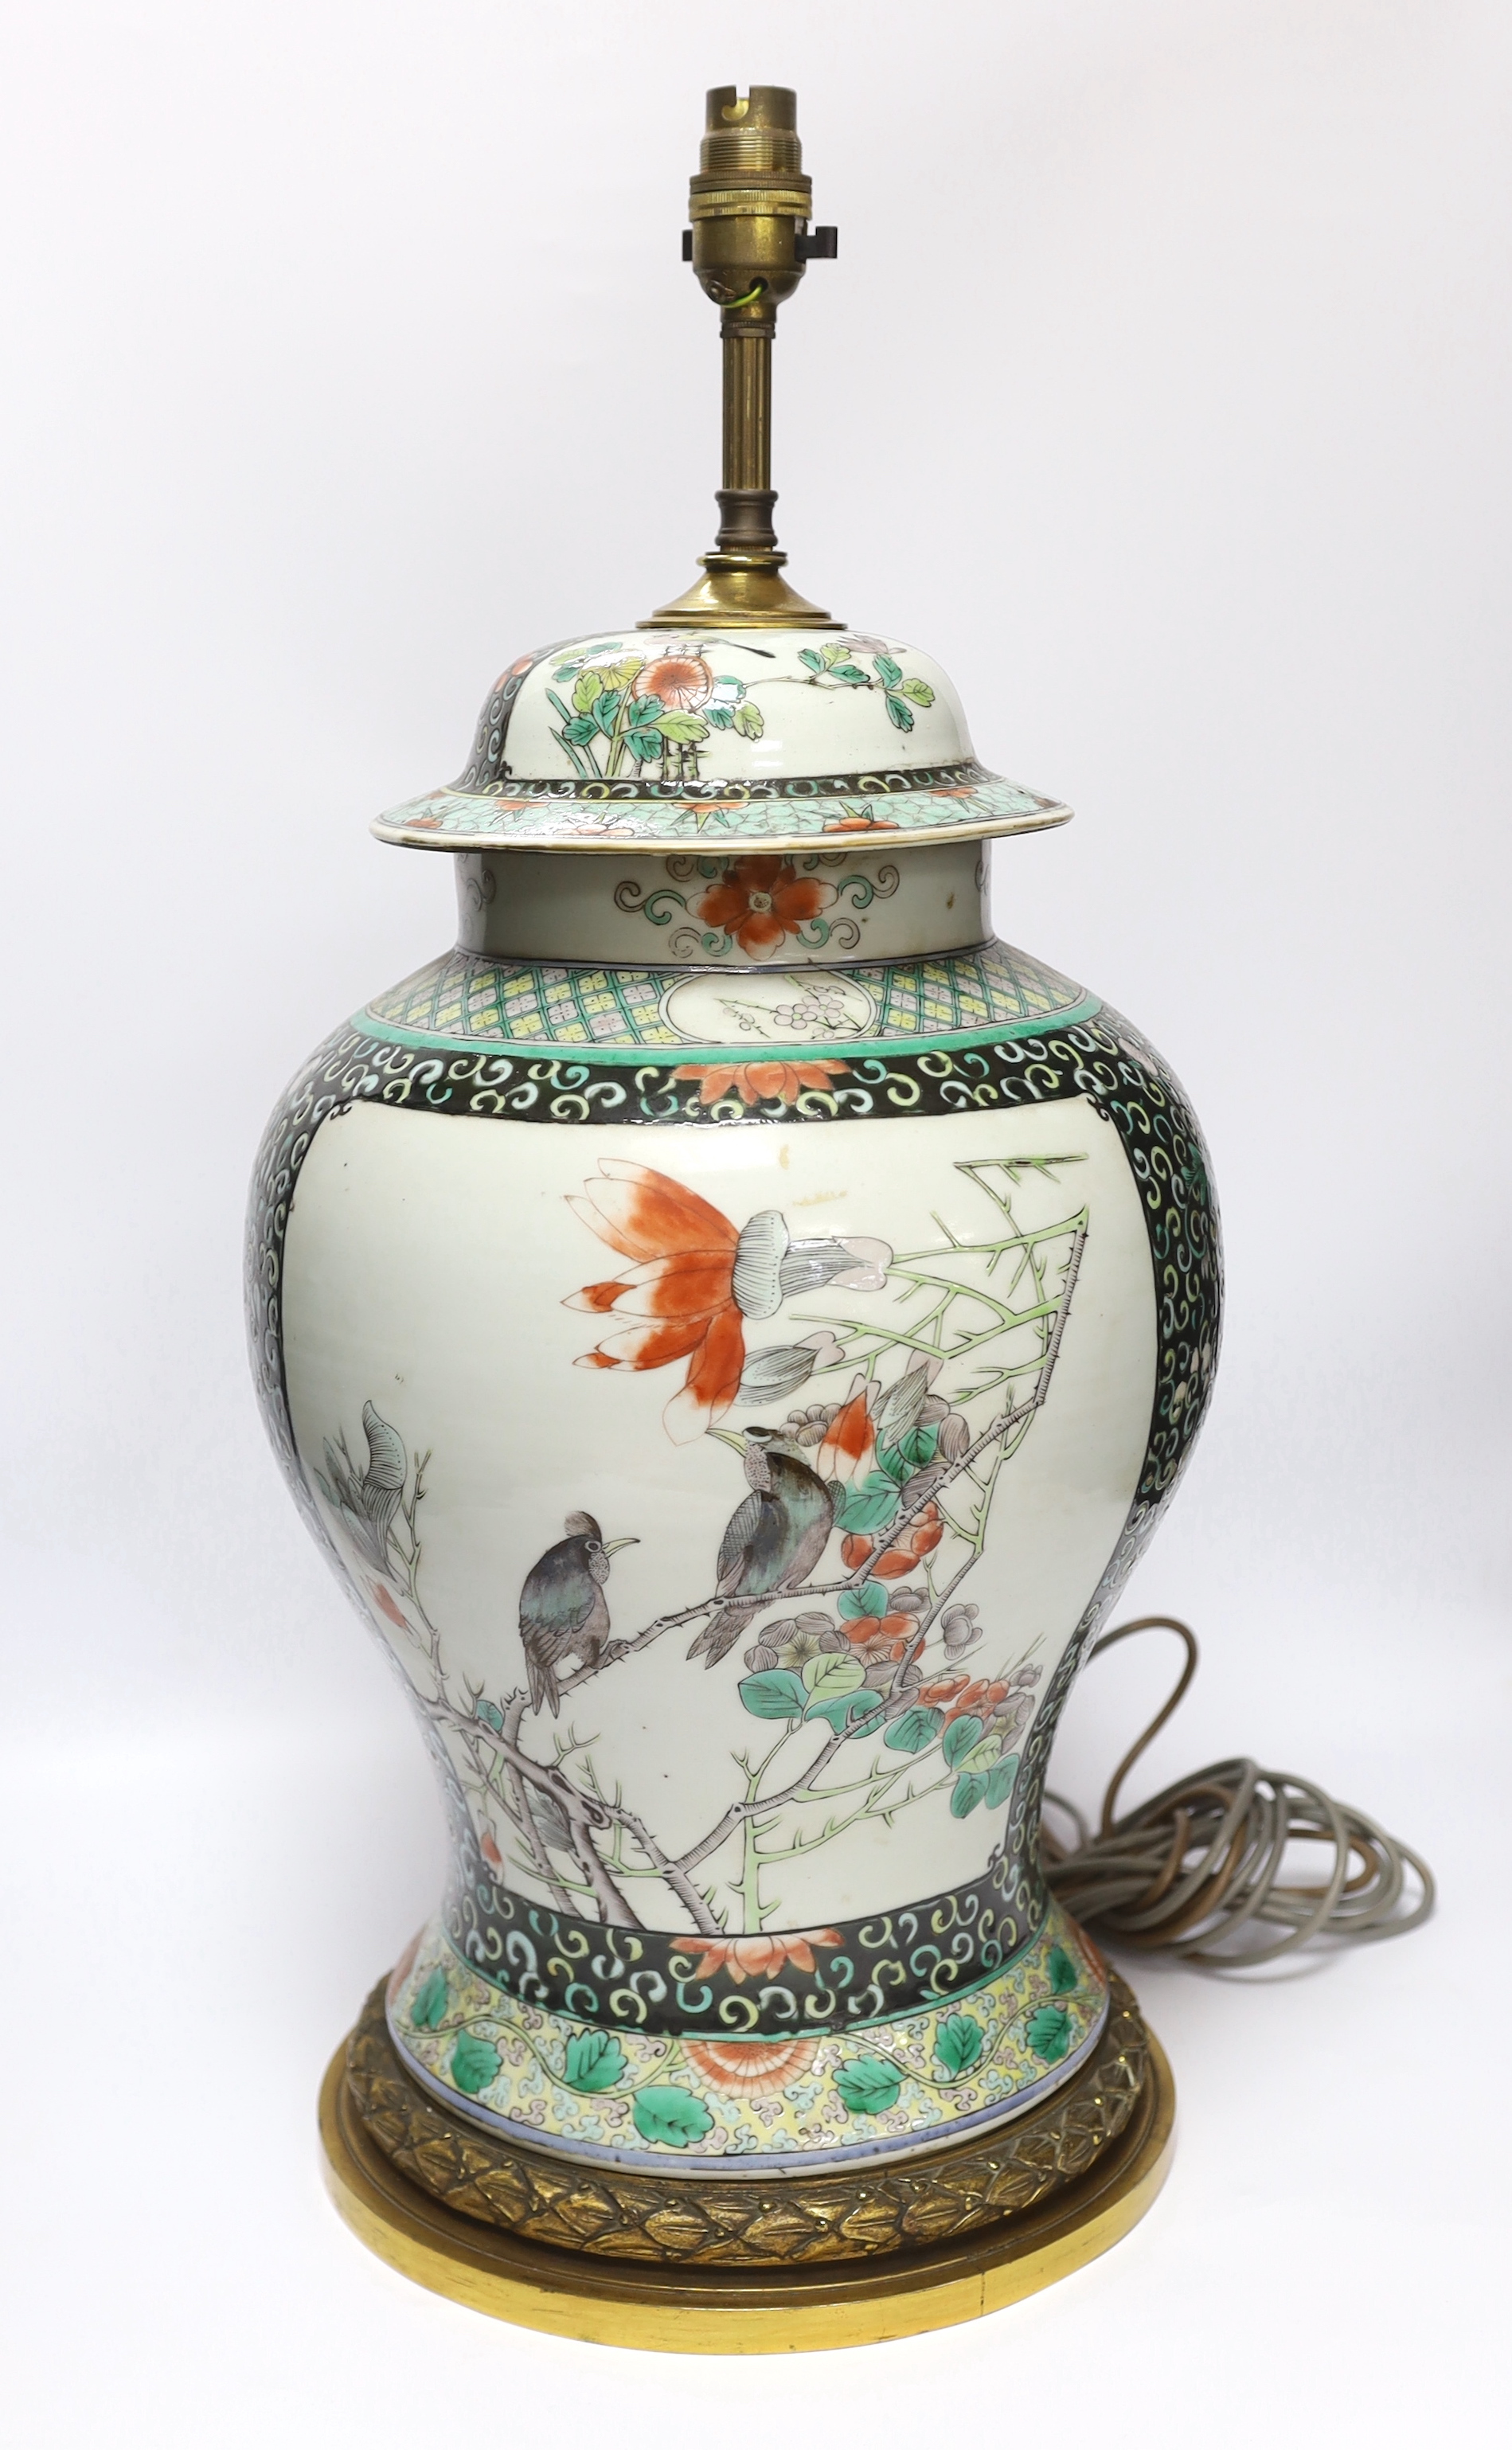 A Chinese famille verte porcelain baluster vase and cover, 19th century, decorated with birds amongst branches and blossom on decorative gilt metal base (now converted to a table lamp and drilled), 56cm total